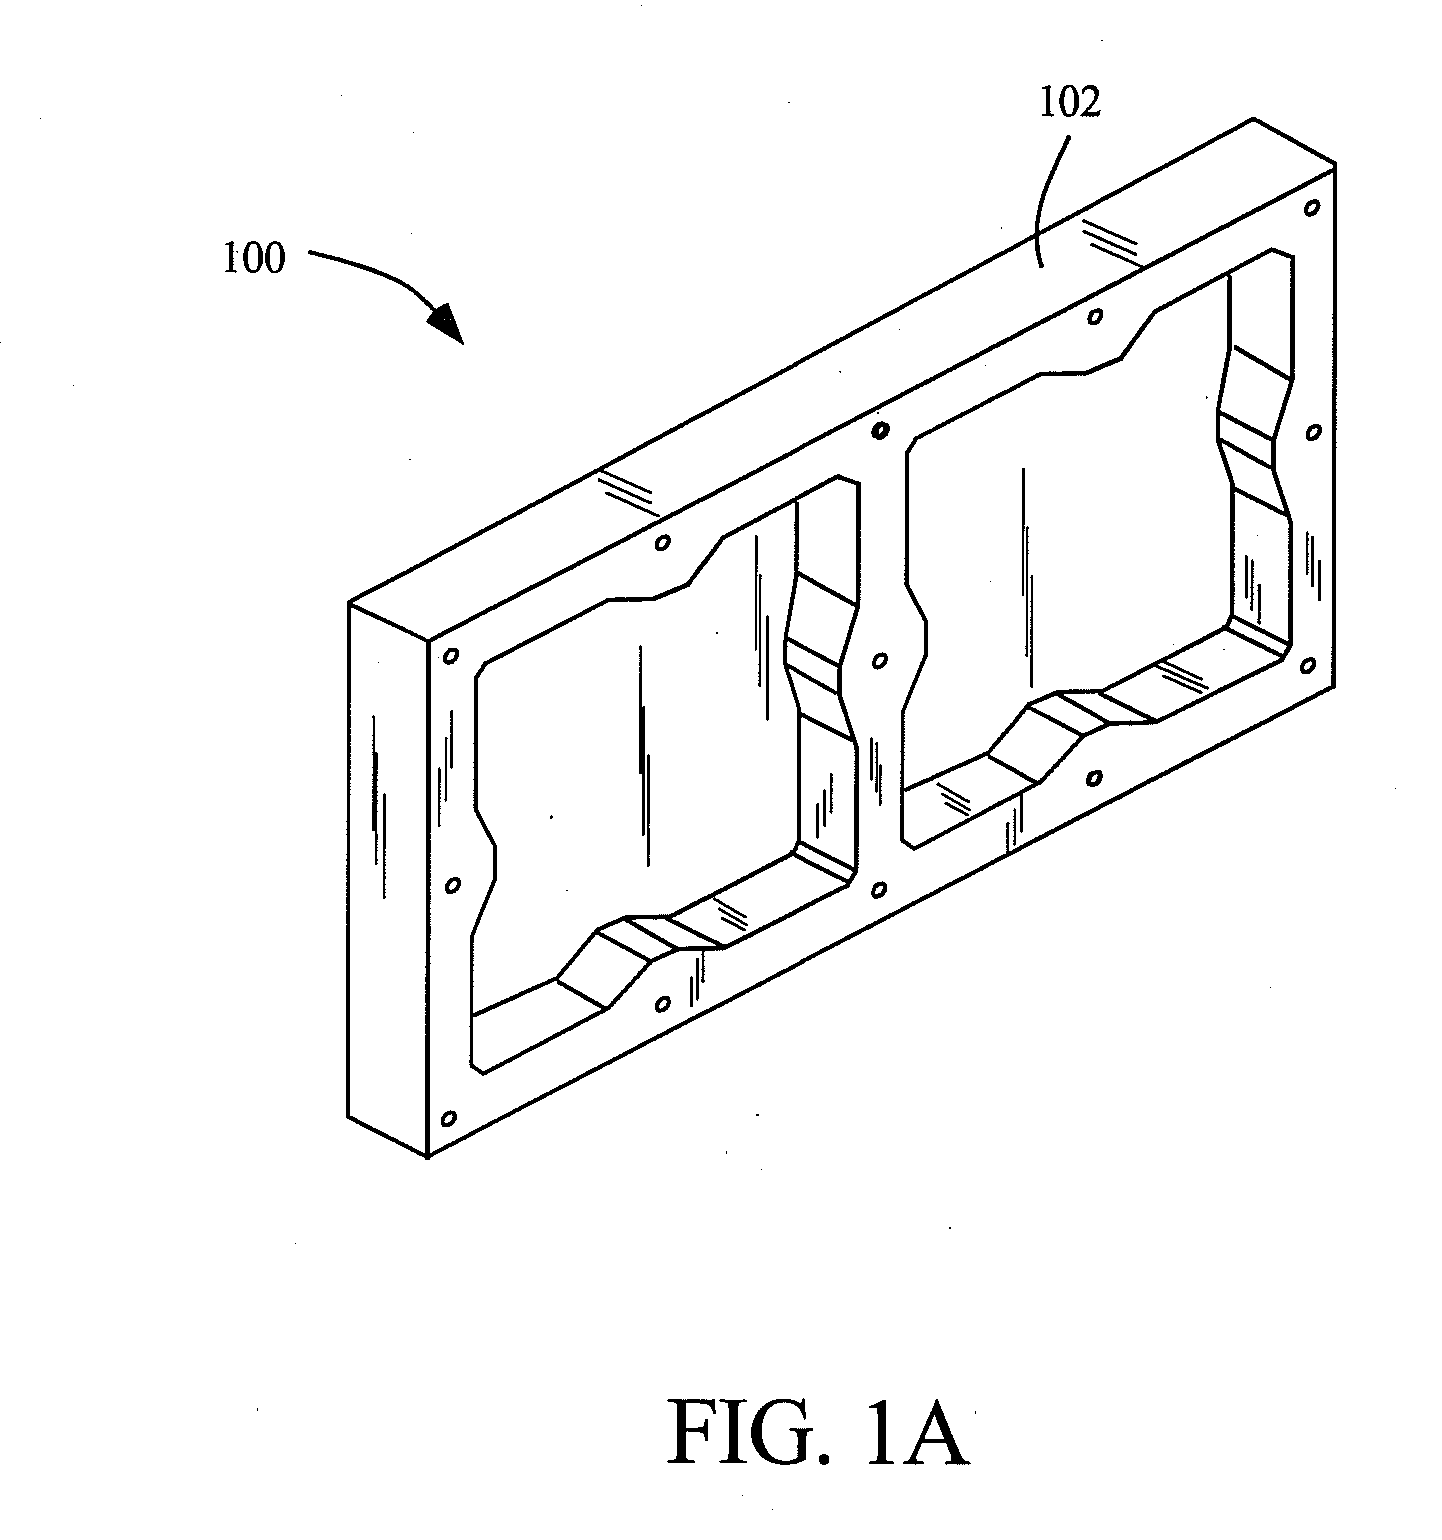 Modular building block system and method of manufacture